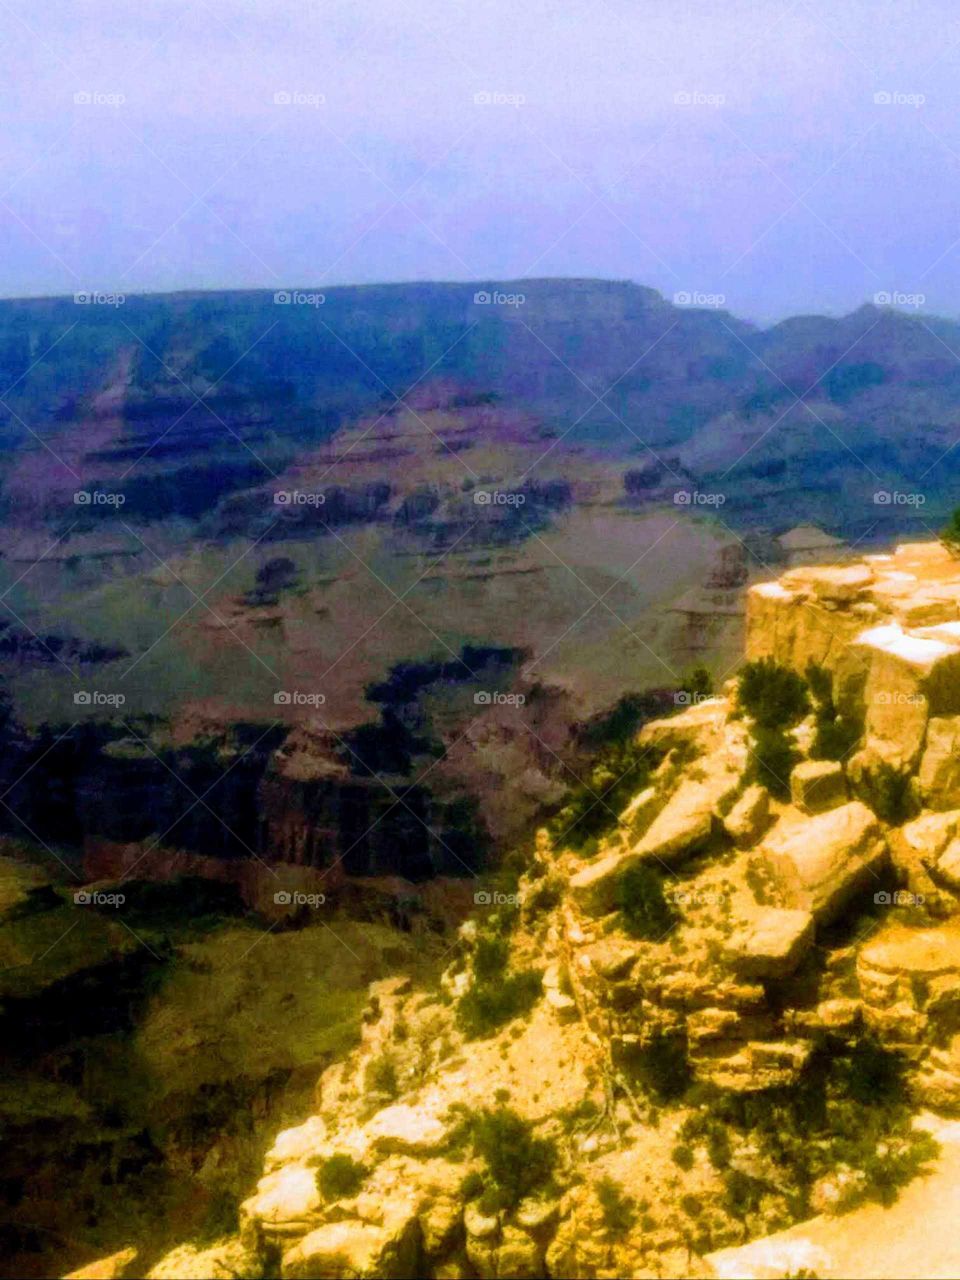 Area of Grand Canyon, with Colorado River between rocky formations